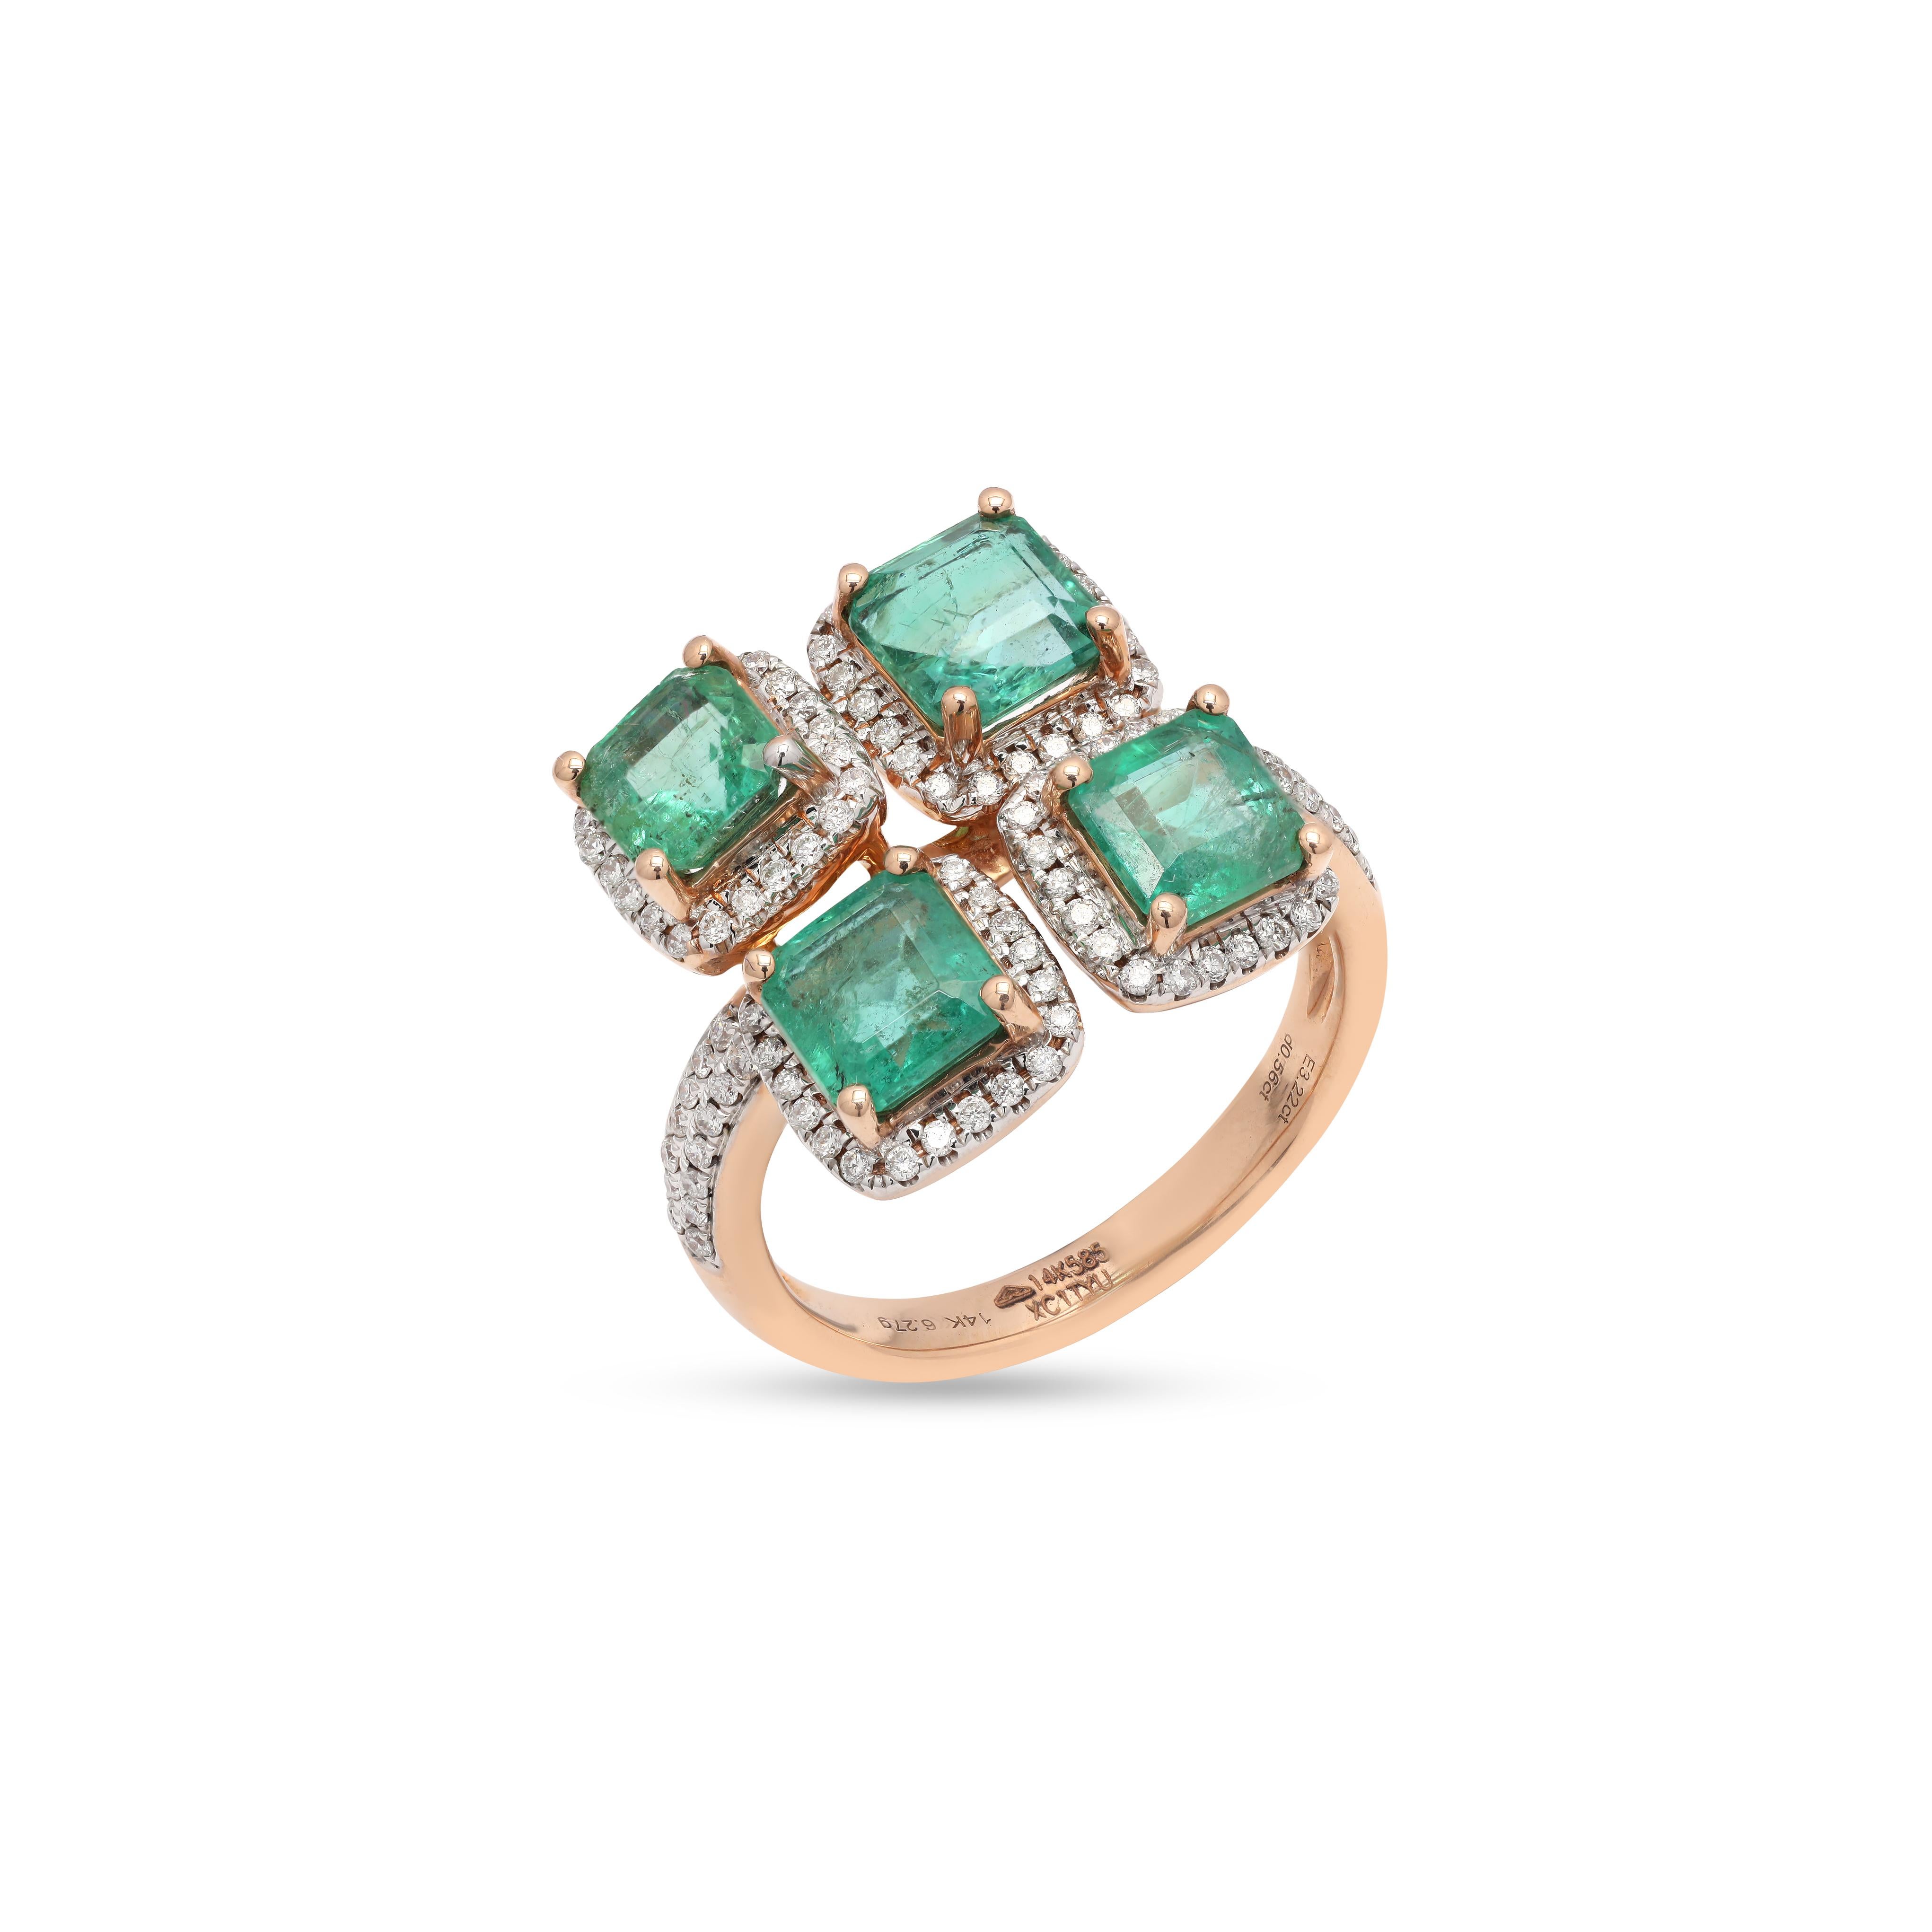 For Sale:  Emerald and Diamond Cocktail Ring in 14K Rose Gold 5